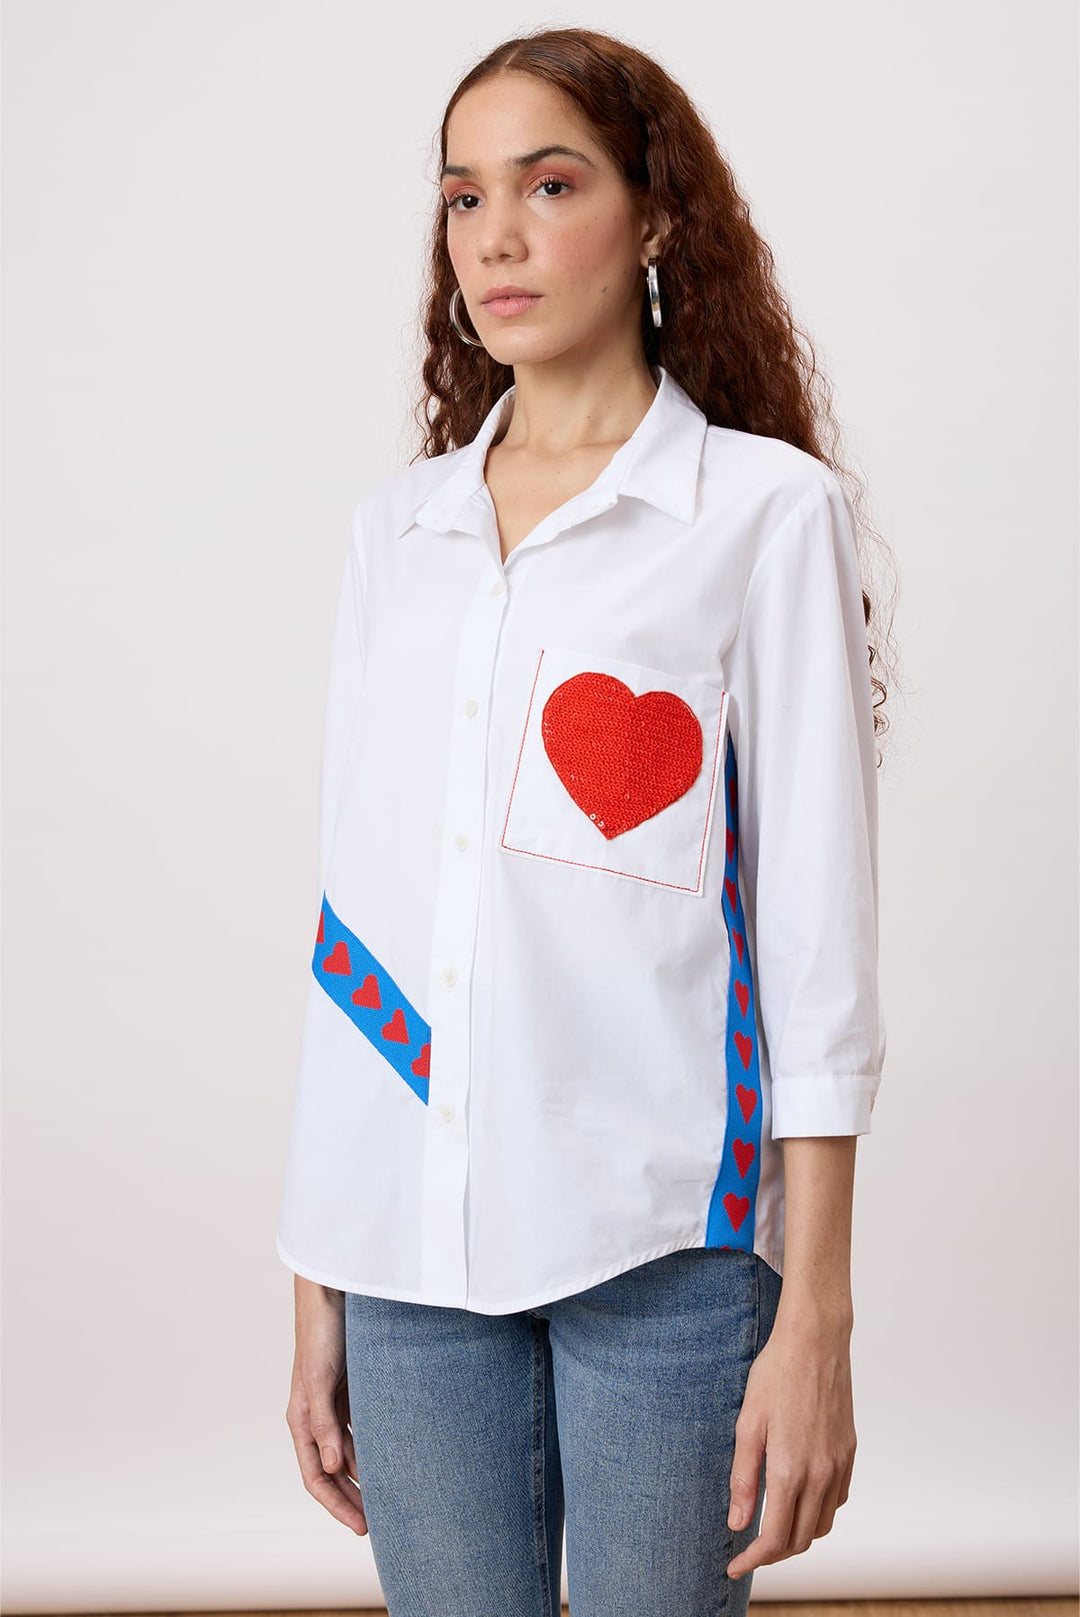 Love Shirt A classic button-down that spreads love - with contrast tape